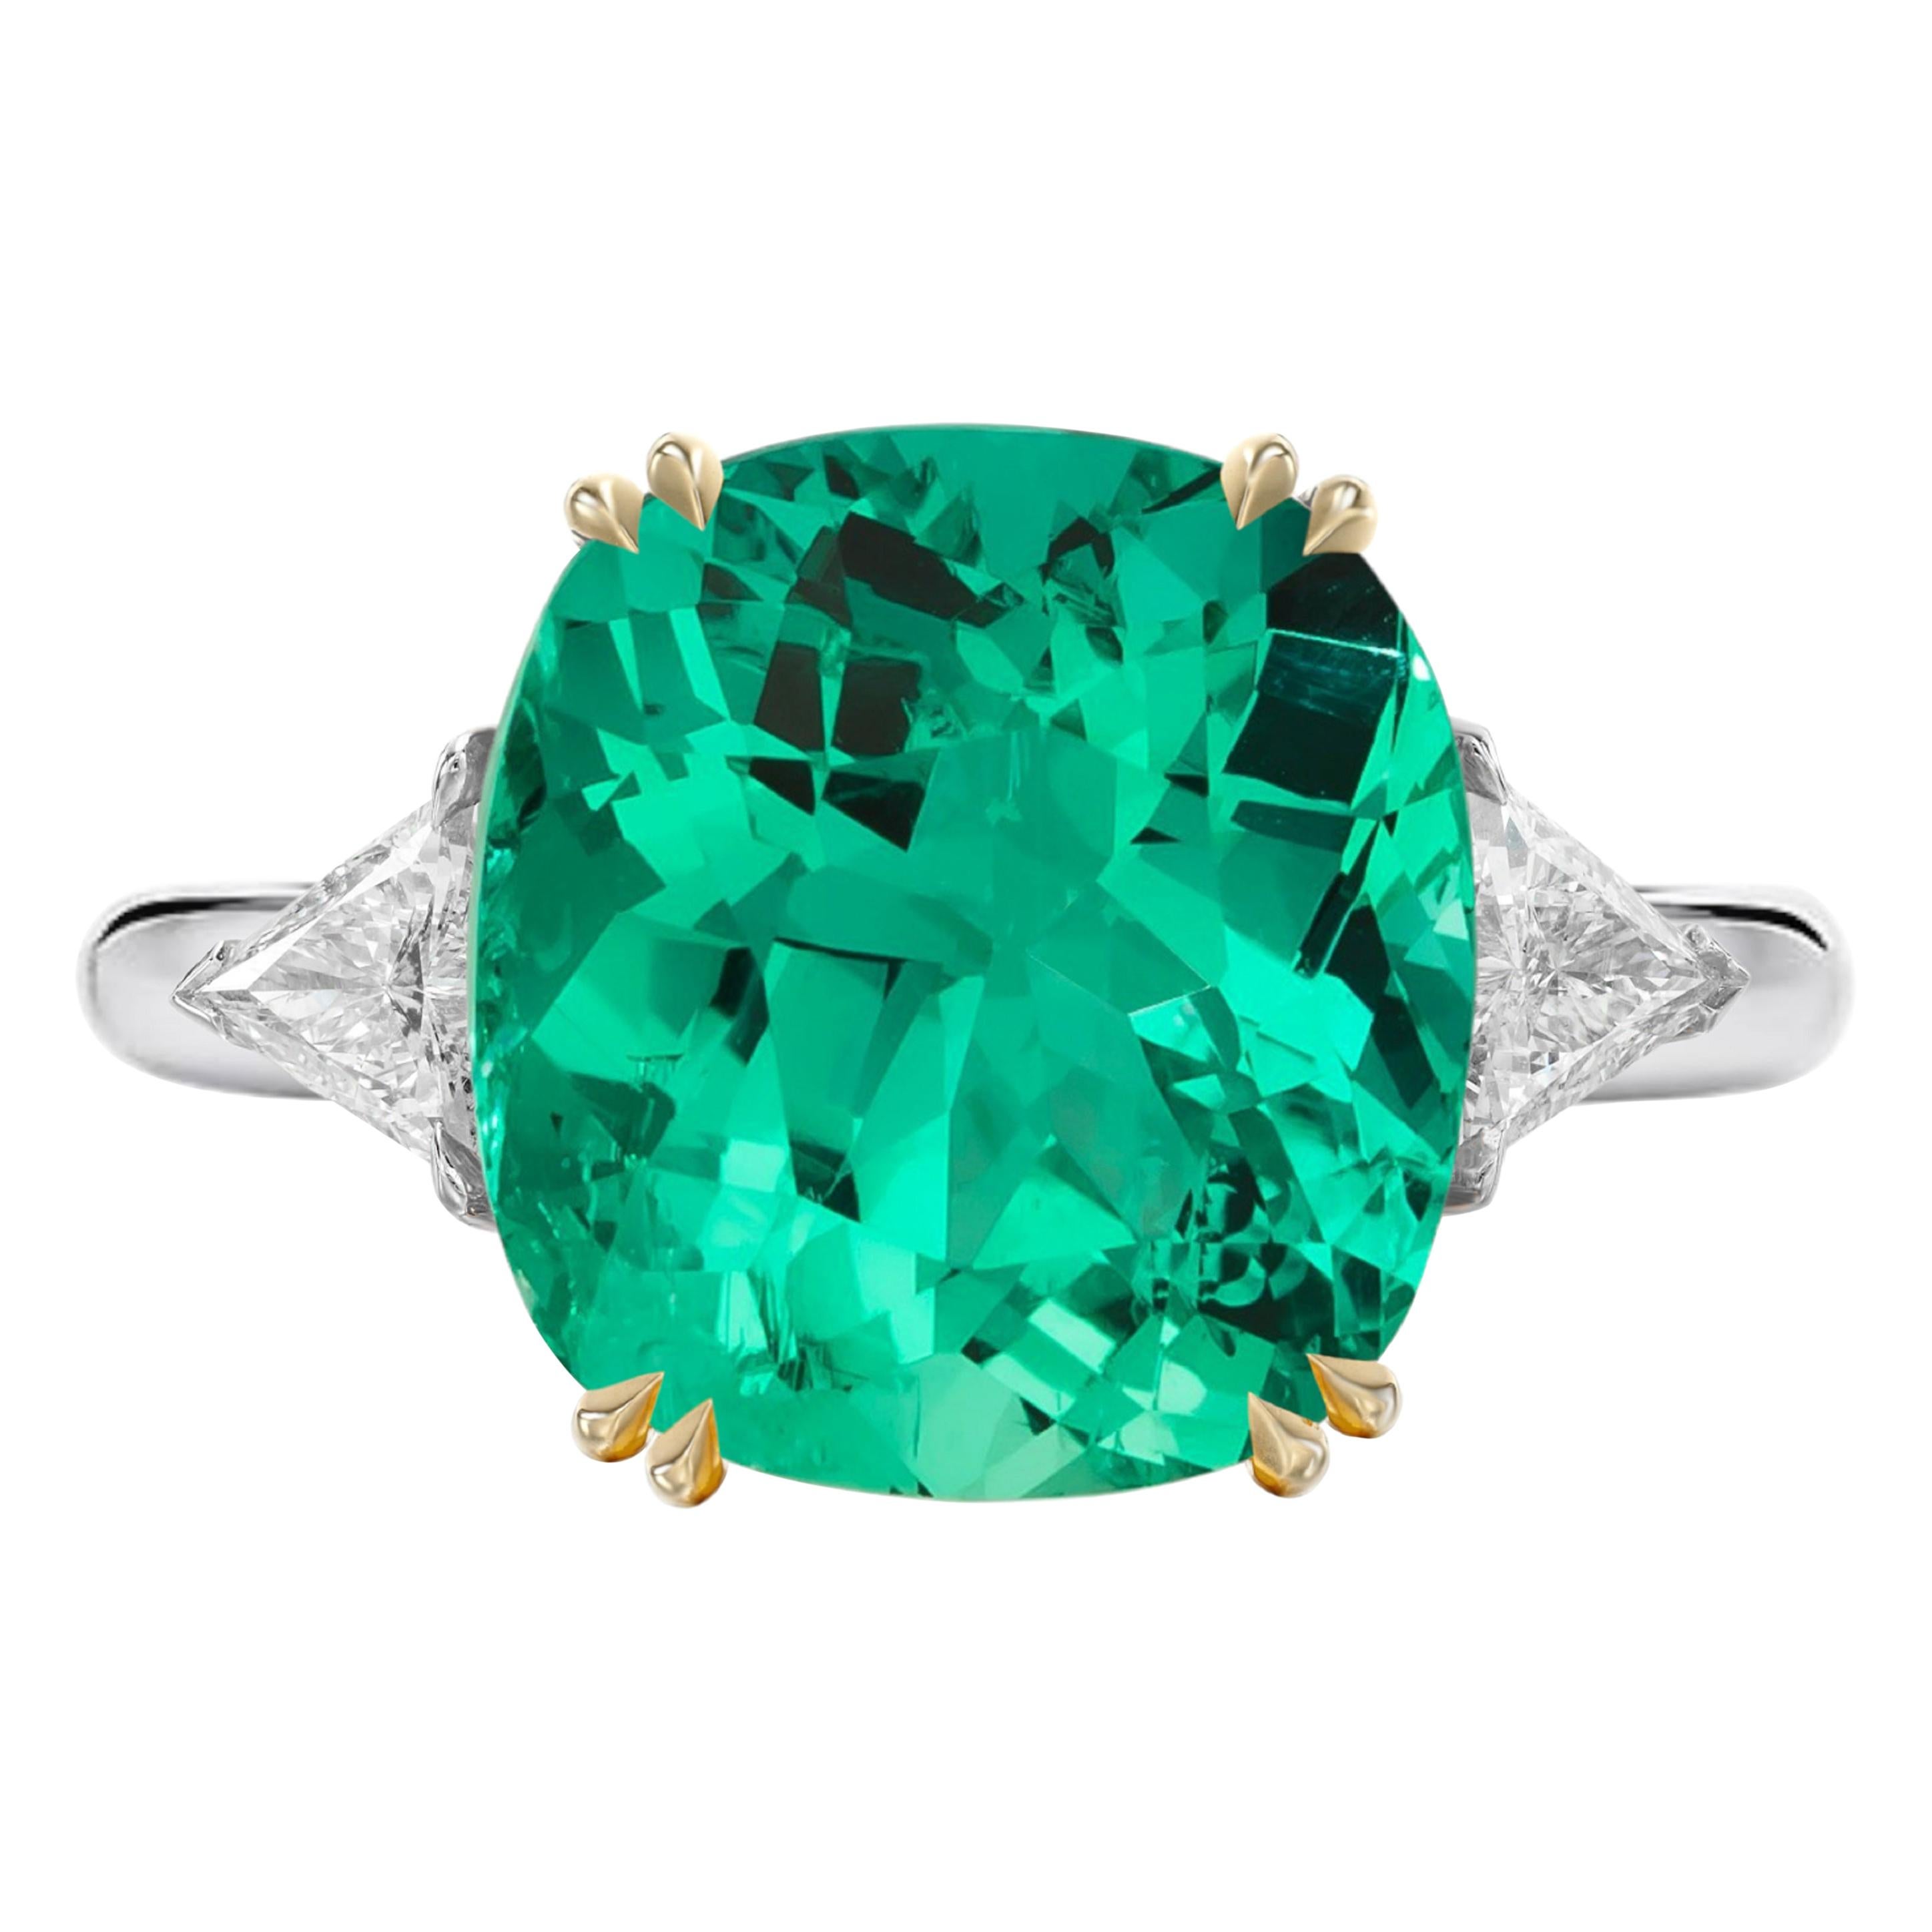 Gubelin Certified 5.65 Carat Untreated No Oil Colombian Emerald Ring